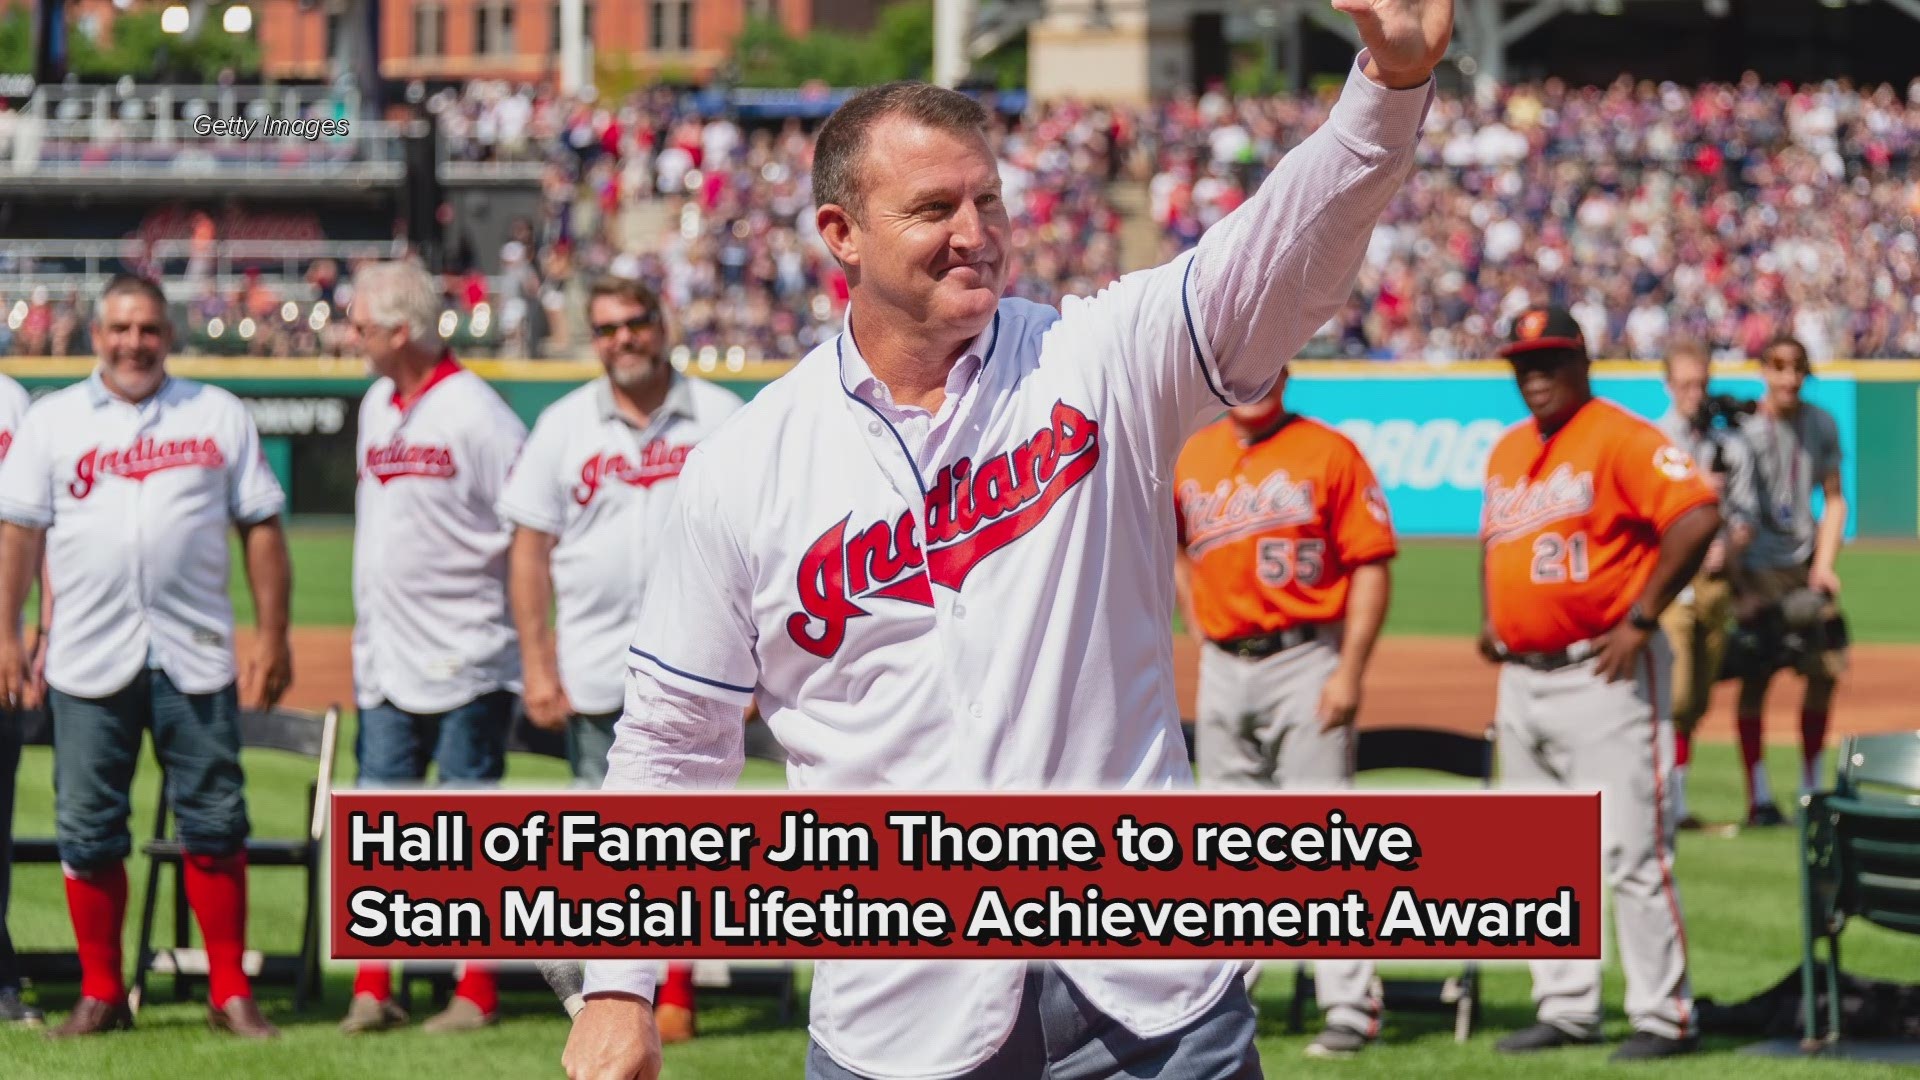 Cleveland Indians Hall of Famer Jim Thome to receive Stan Musial Lifetime Achievement Award